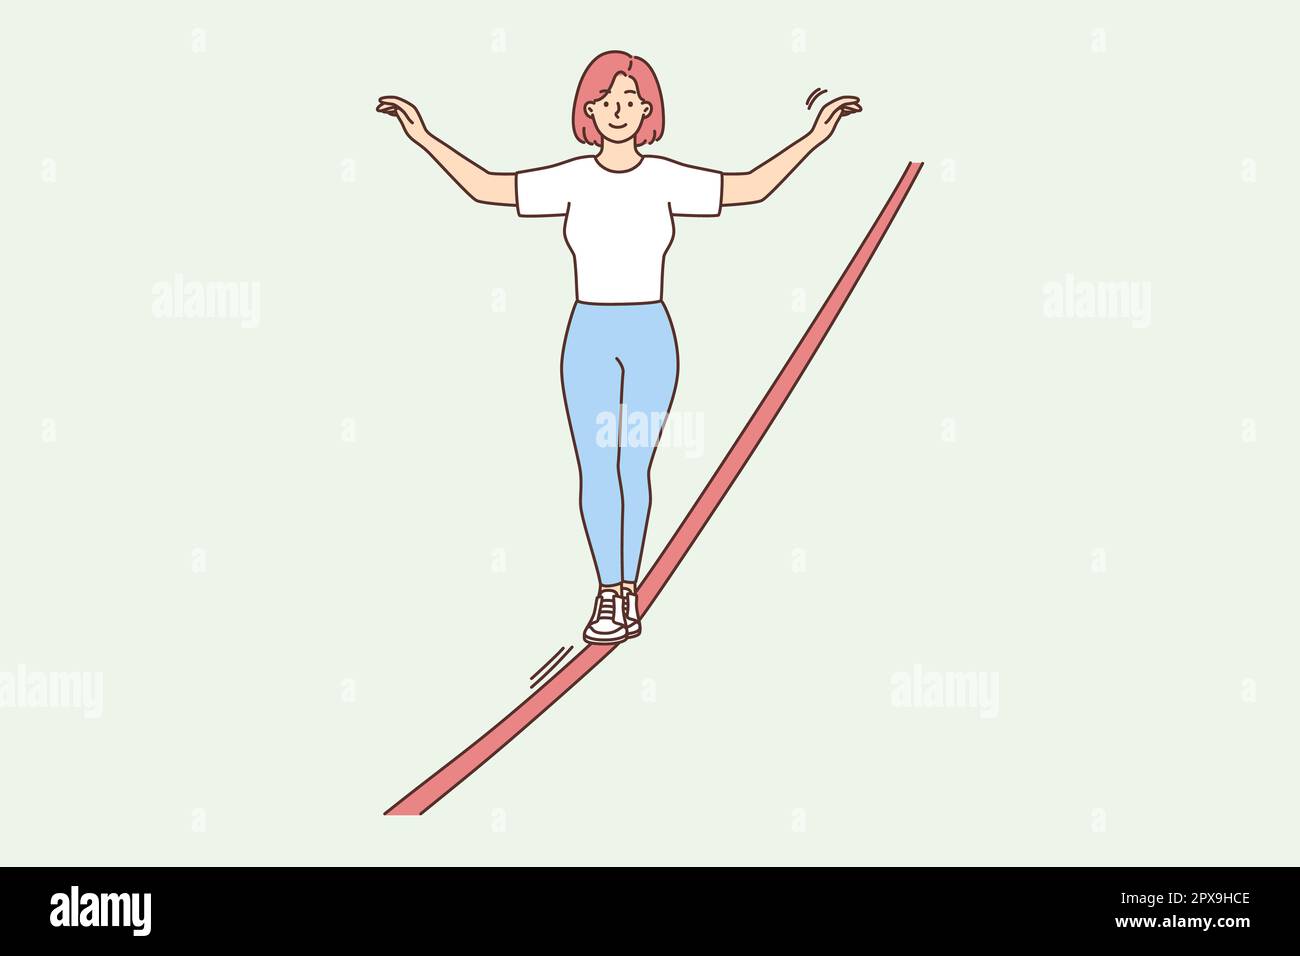 https://c8.alamy.com/comp/2PX9HCE/woman-walking-tightrope-smiling-female-walker-do-sport-training-engaged-in-physical-activity-hobby-vector-illustration-2PX9HCE.jpg